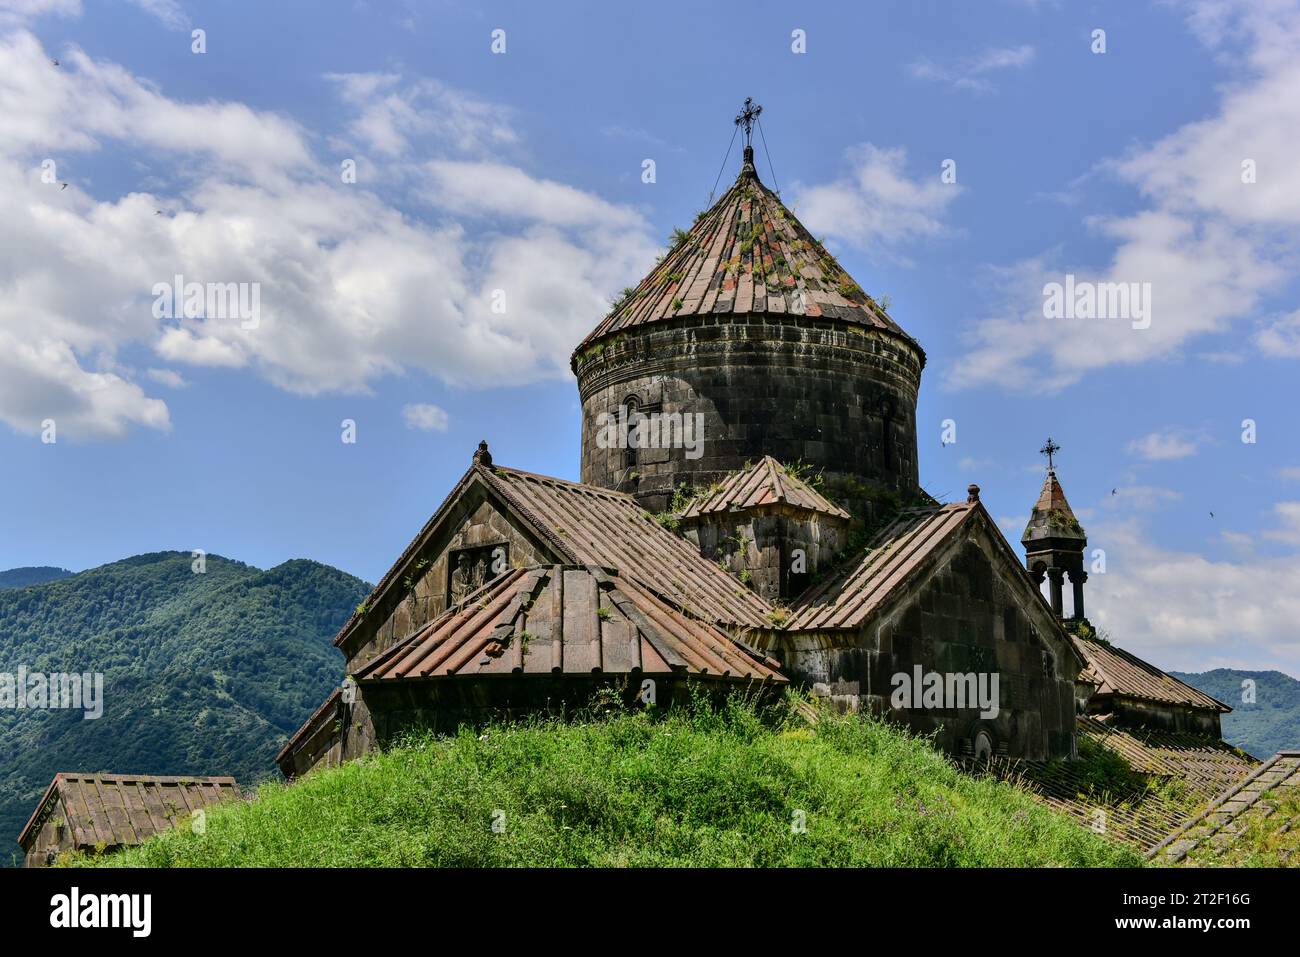 Haghpat Monastery, also known as Haghpatavank, a medieval monastery complex in Haghpat, Armenia, built between the 10th and 13th century. Stock Photo